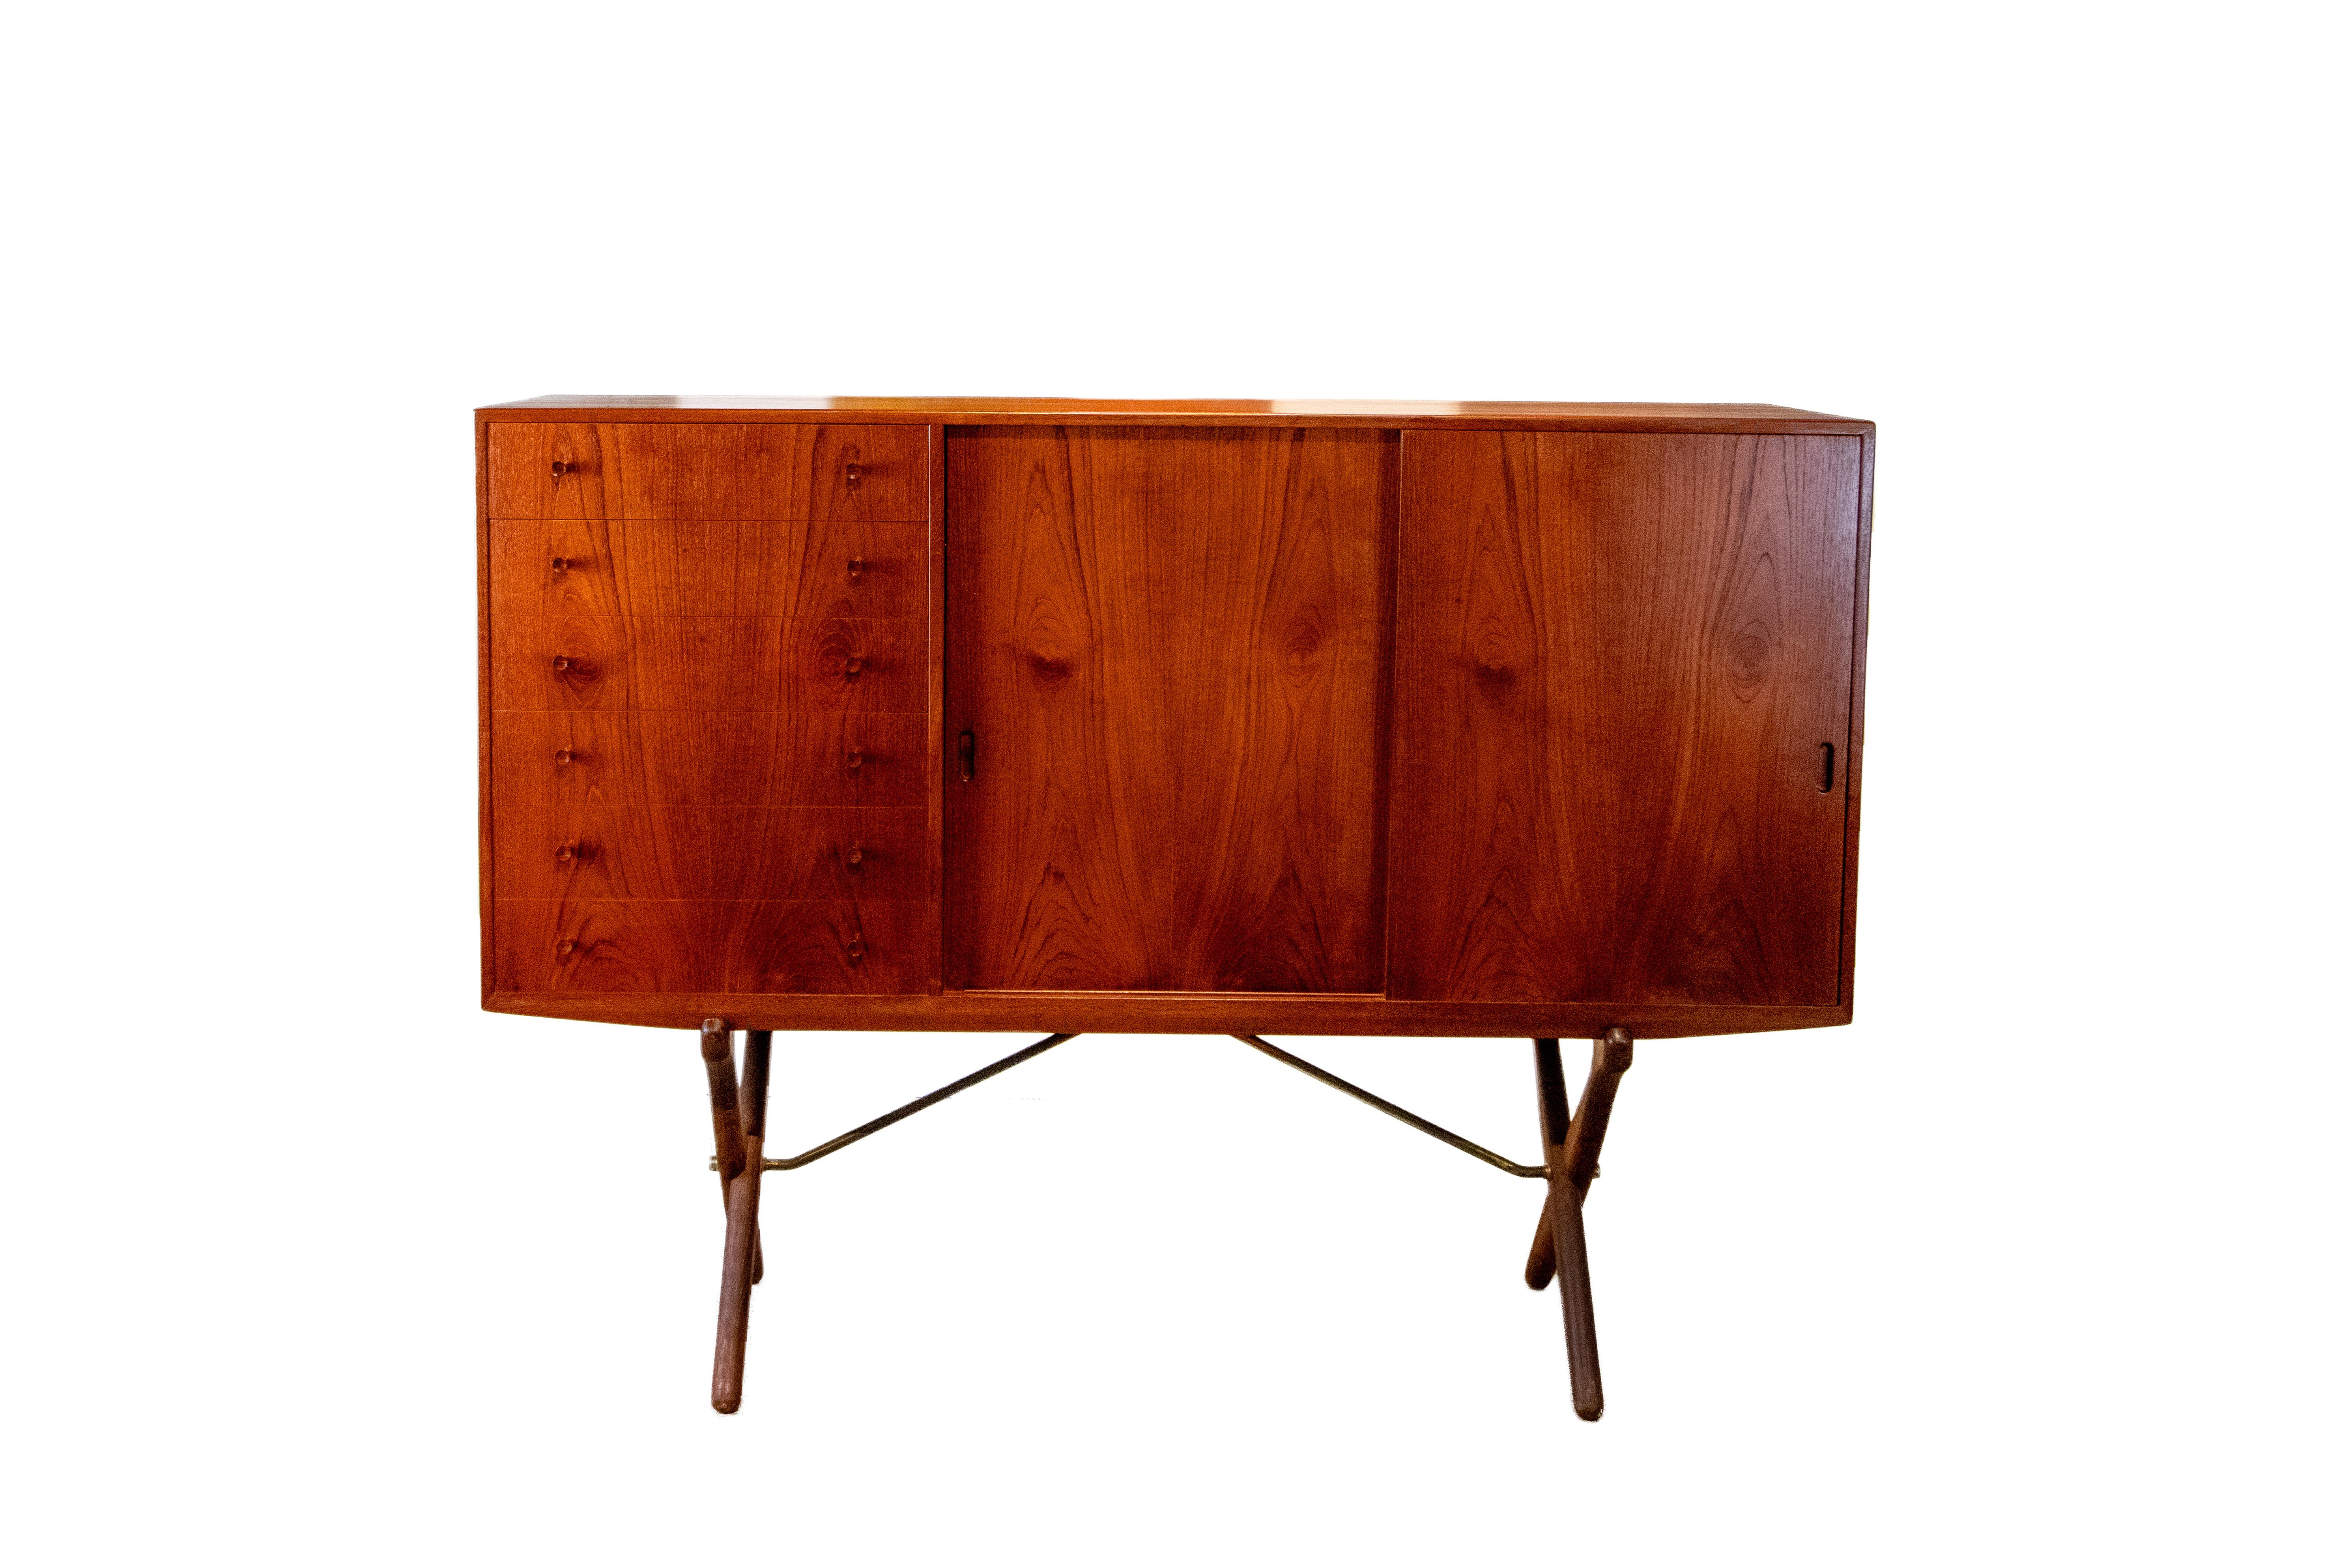 A tall sideboard, model CH304, designed by Hans Wegner for Carl Hansen. Teak cabinet with three distinct sections. The left side having veneer matched drawers, sliding doors canceling open shelving in the middle, and 5 pullout trays on the right.